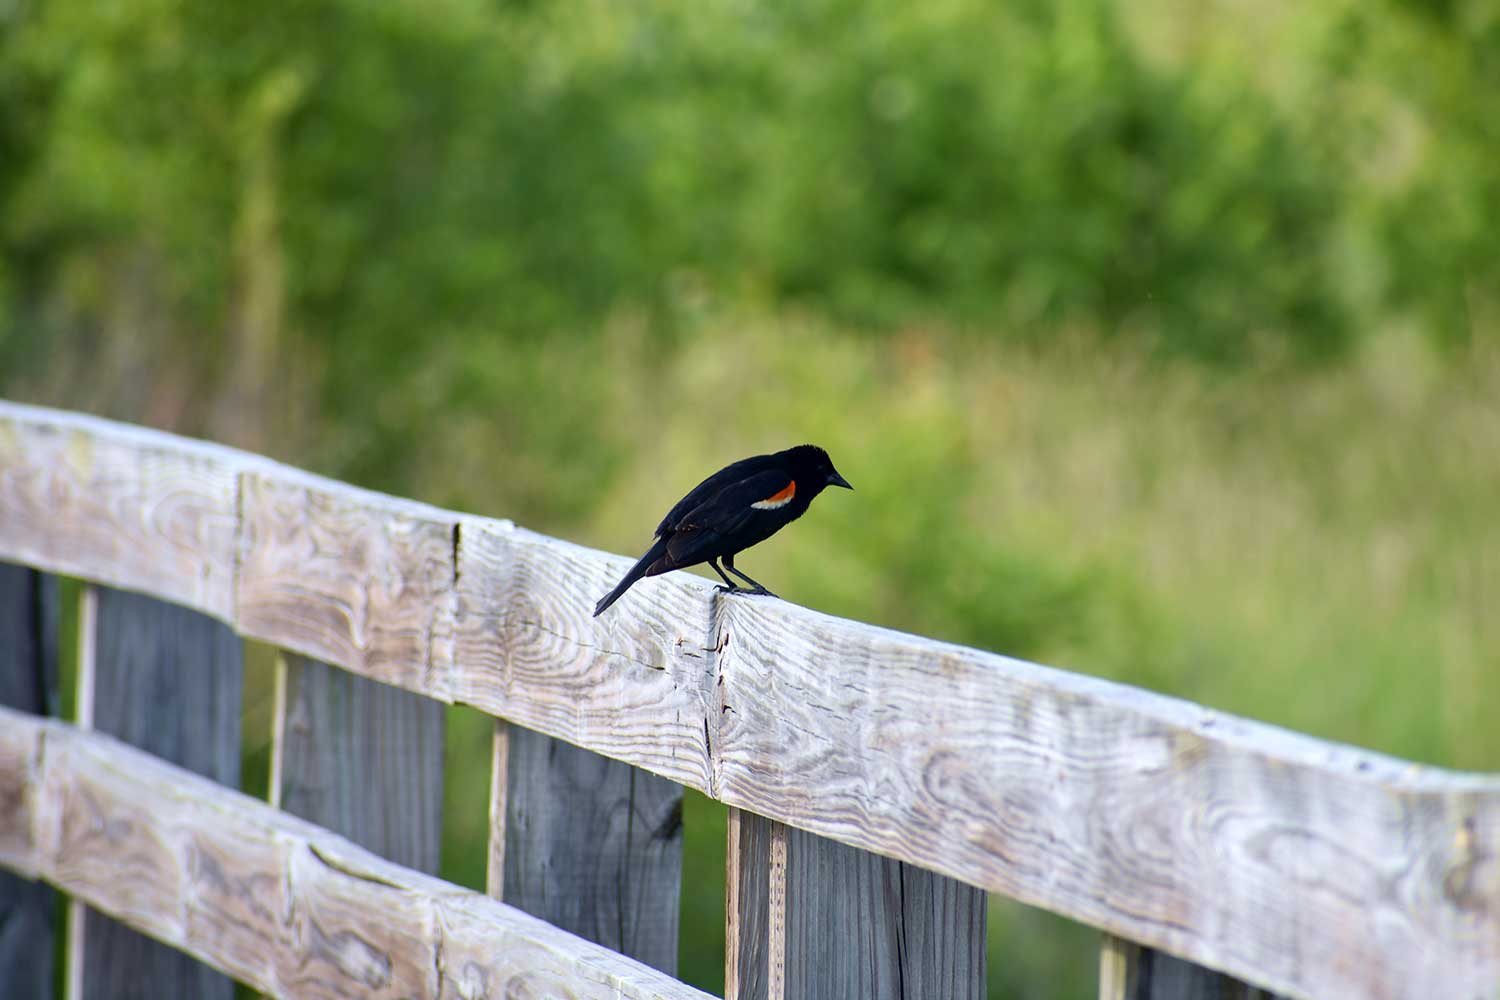 A red-winged blackbird on a wooden post.